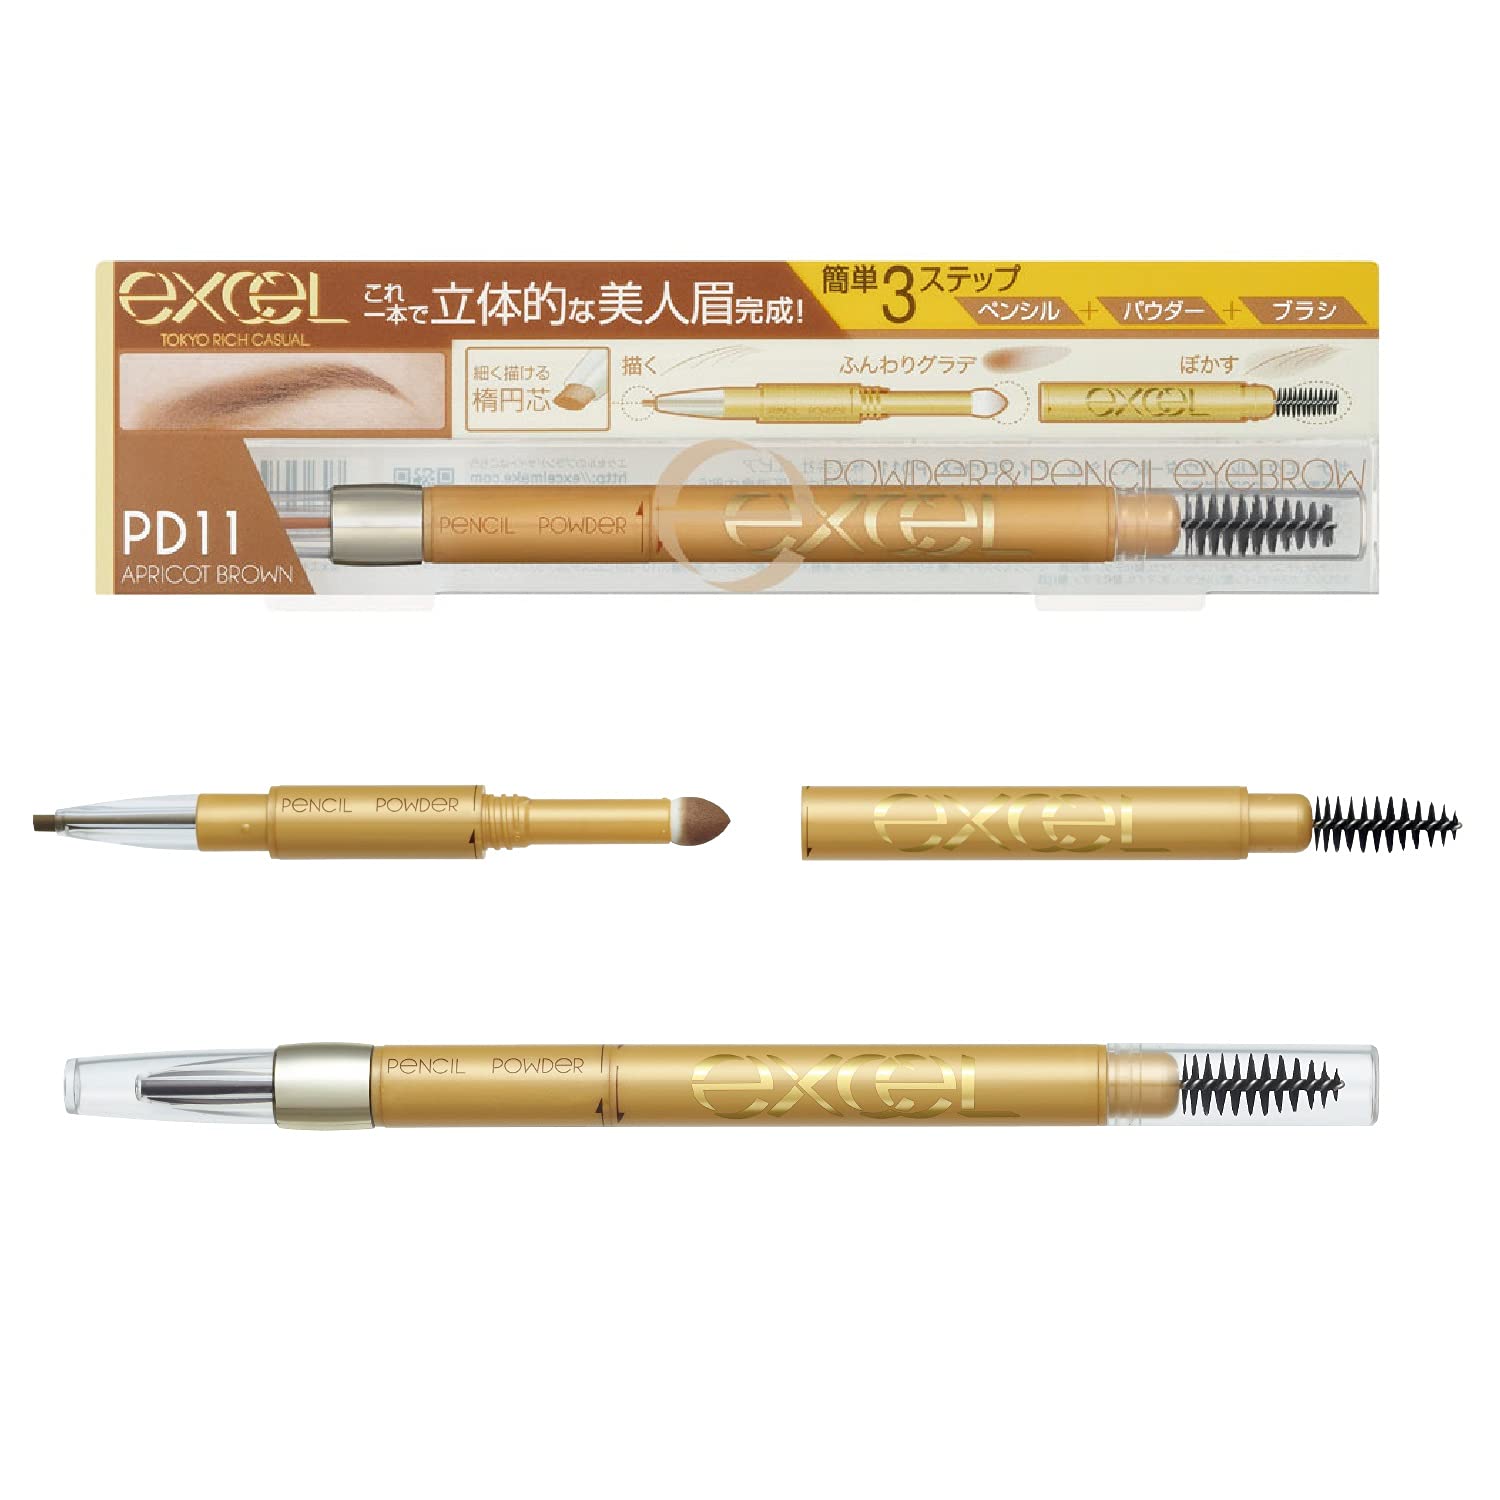 Excel Powder & Pencil Eyebrow EX PD11 (Apricot Brown) 3 - in - 1 - Eyebrow In Japan